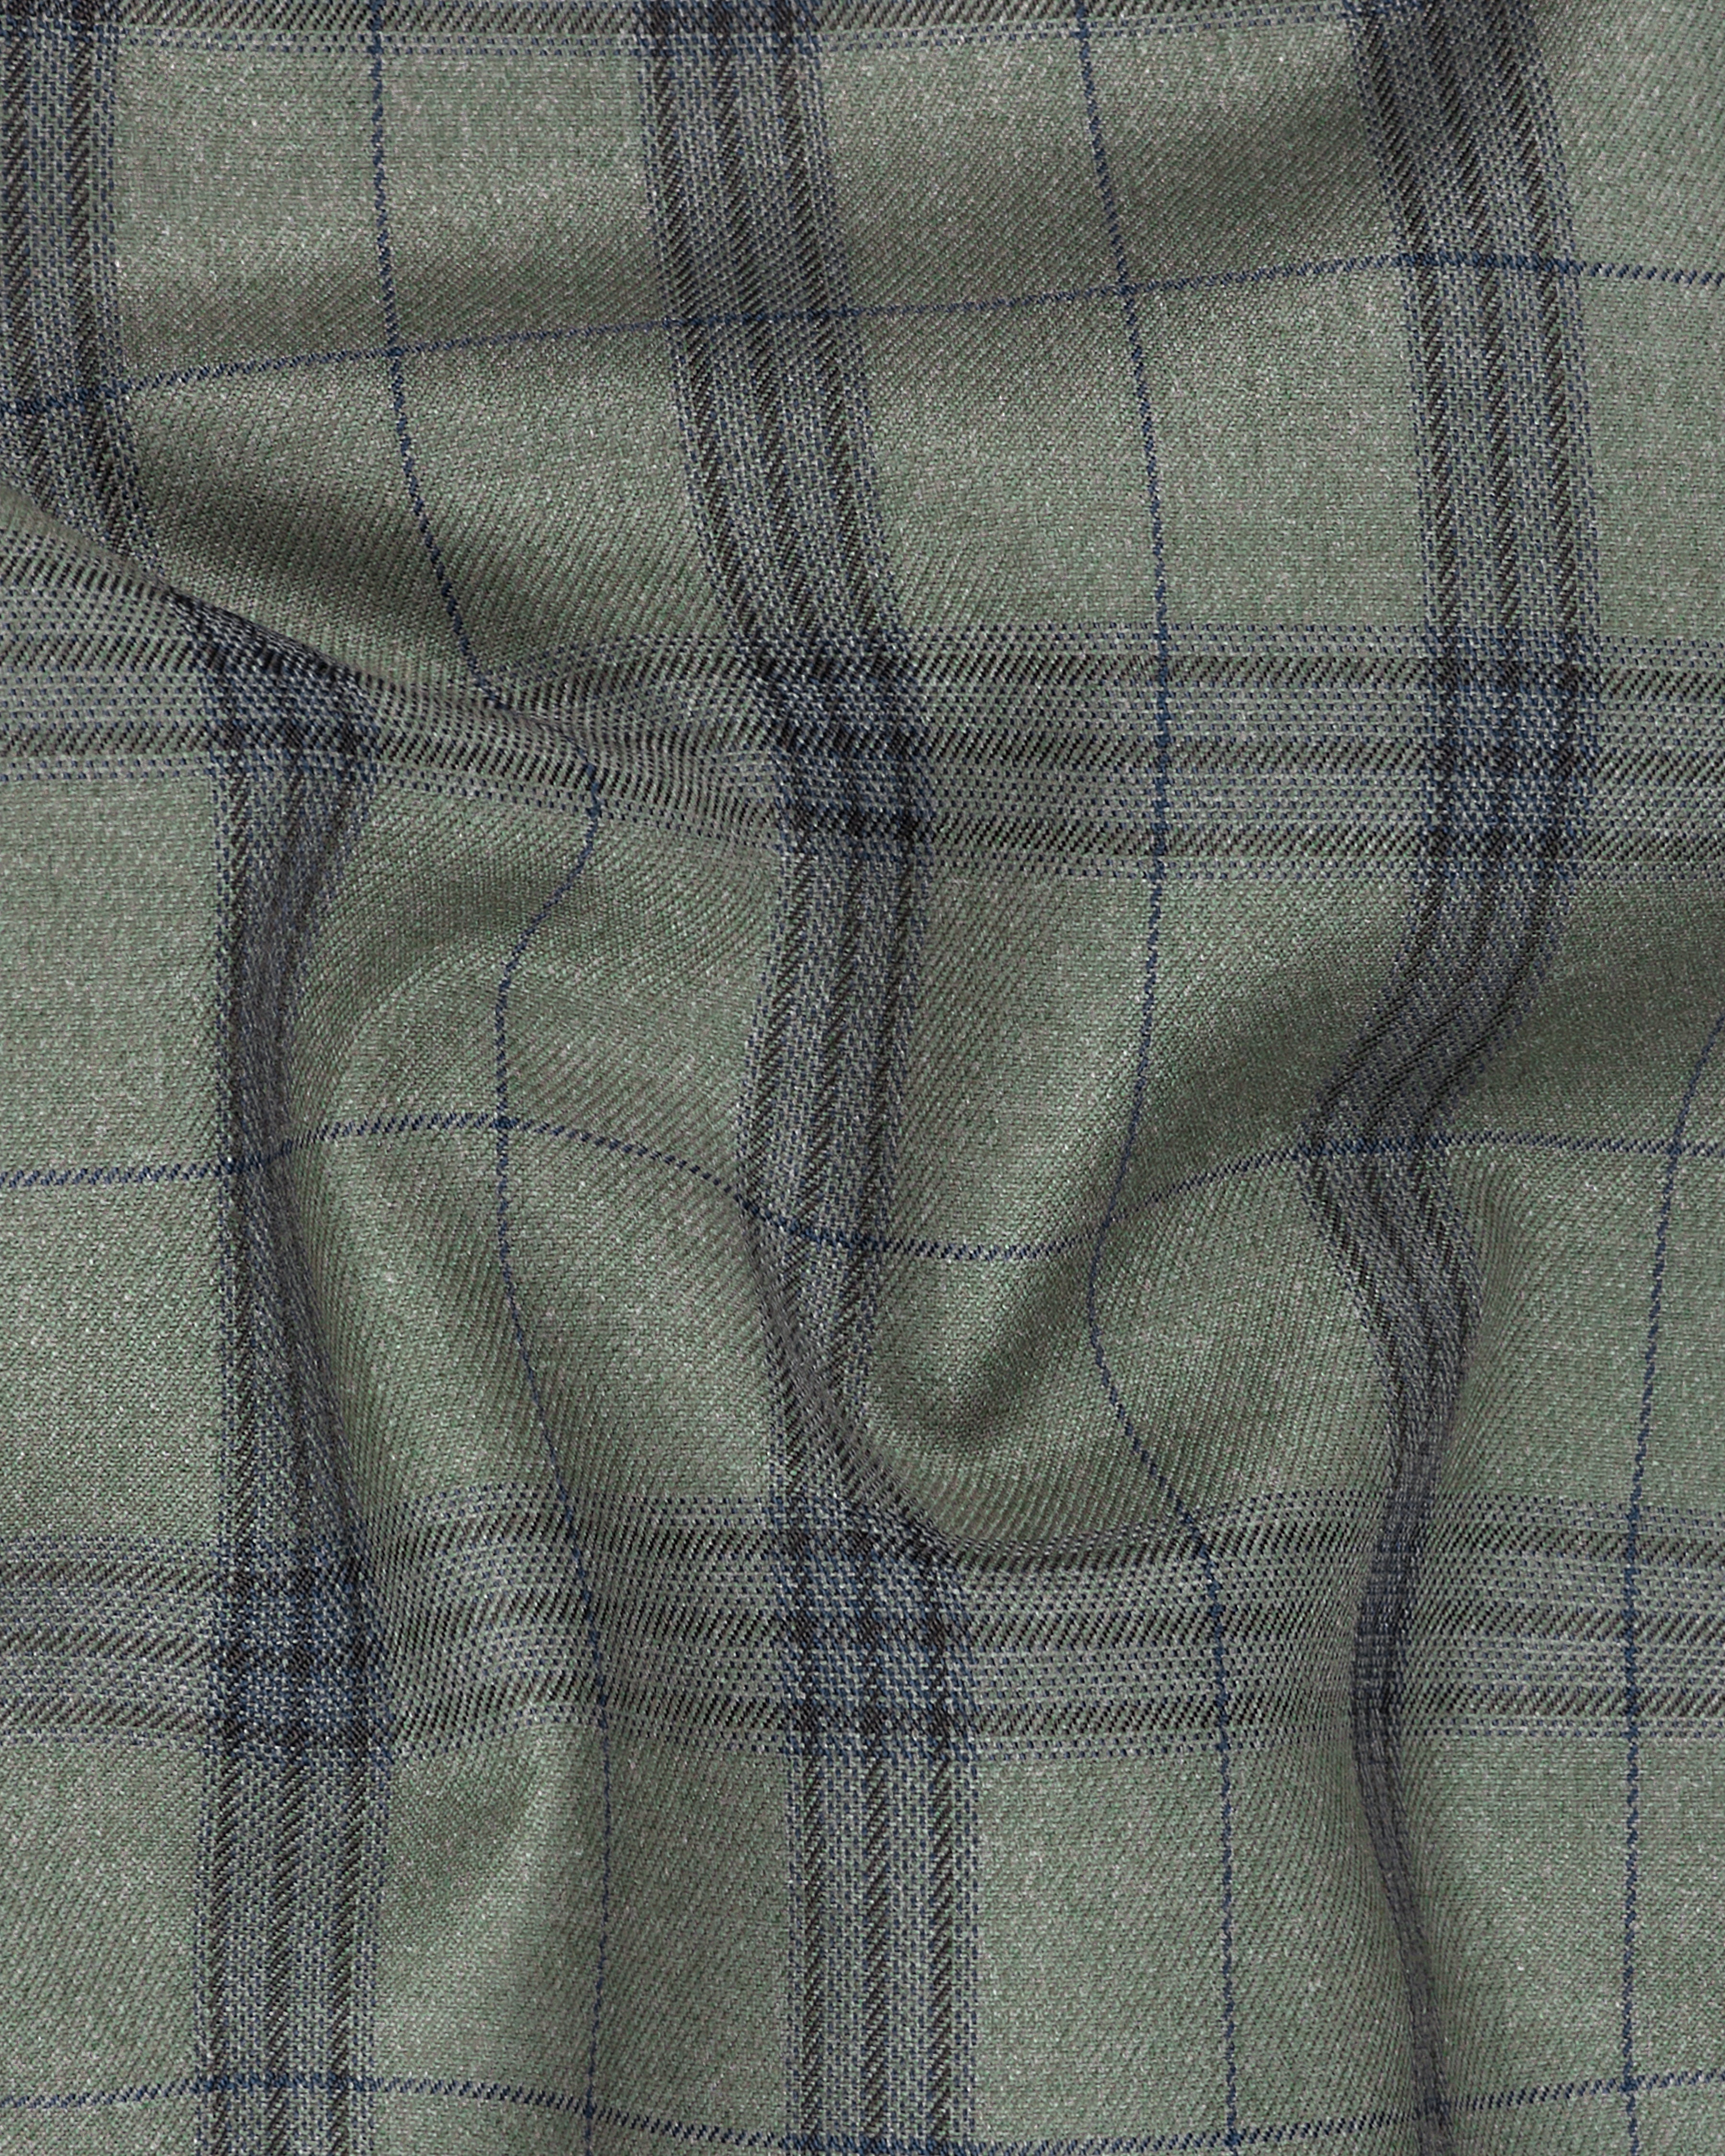 Limed Green and Martinique Blue Plaid Waistcoat V2277-36, V2277-38, V2277-40, V2277-42, V2277-44, V2277-46, V2277-48, V2277-50, V2277-52, V2277-54, V2277-56, V2277-58, V2277-60